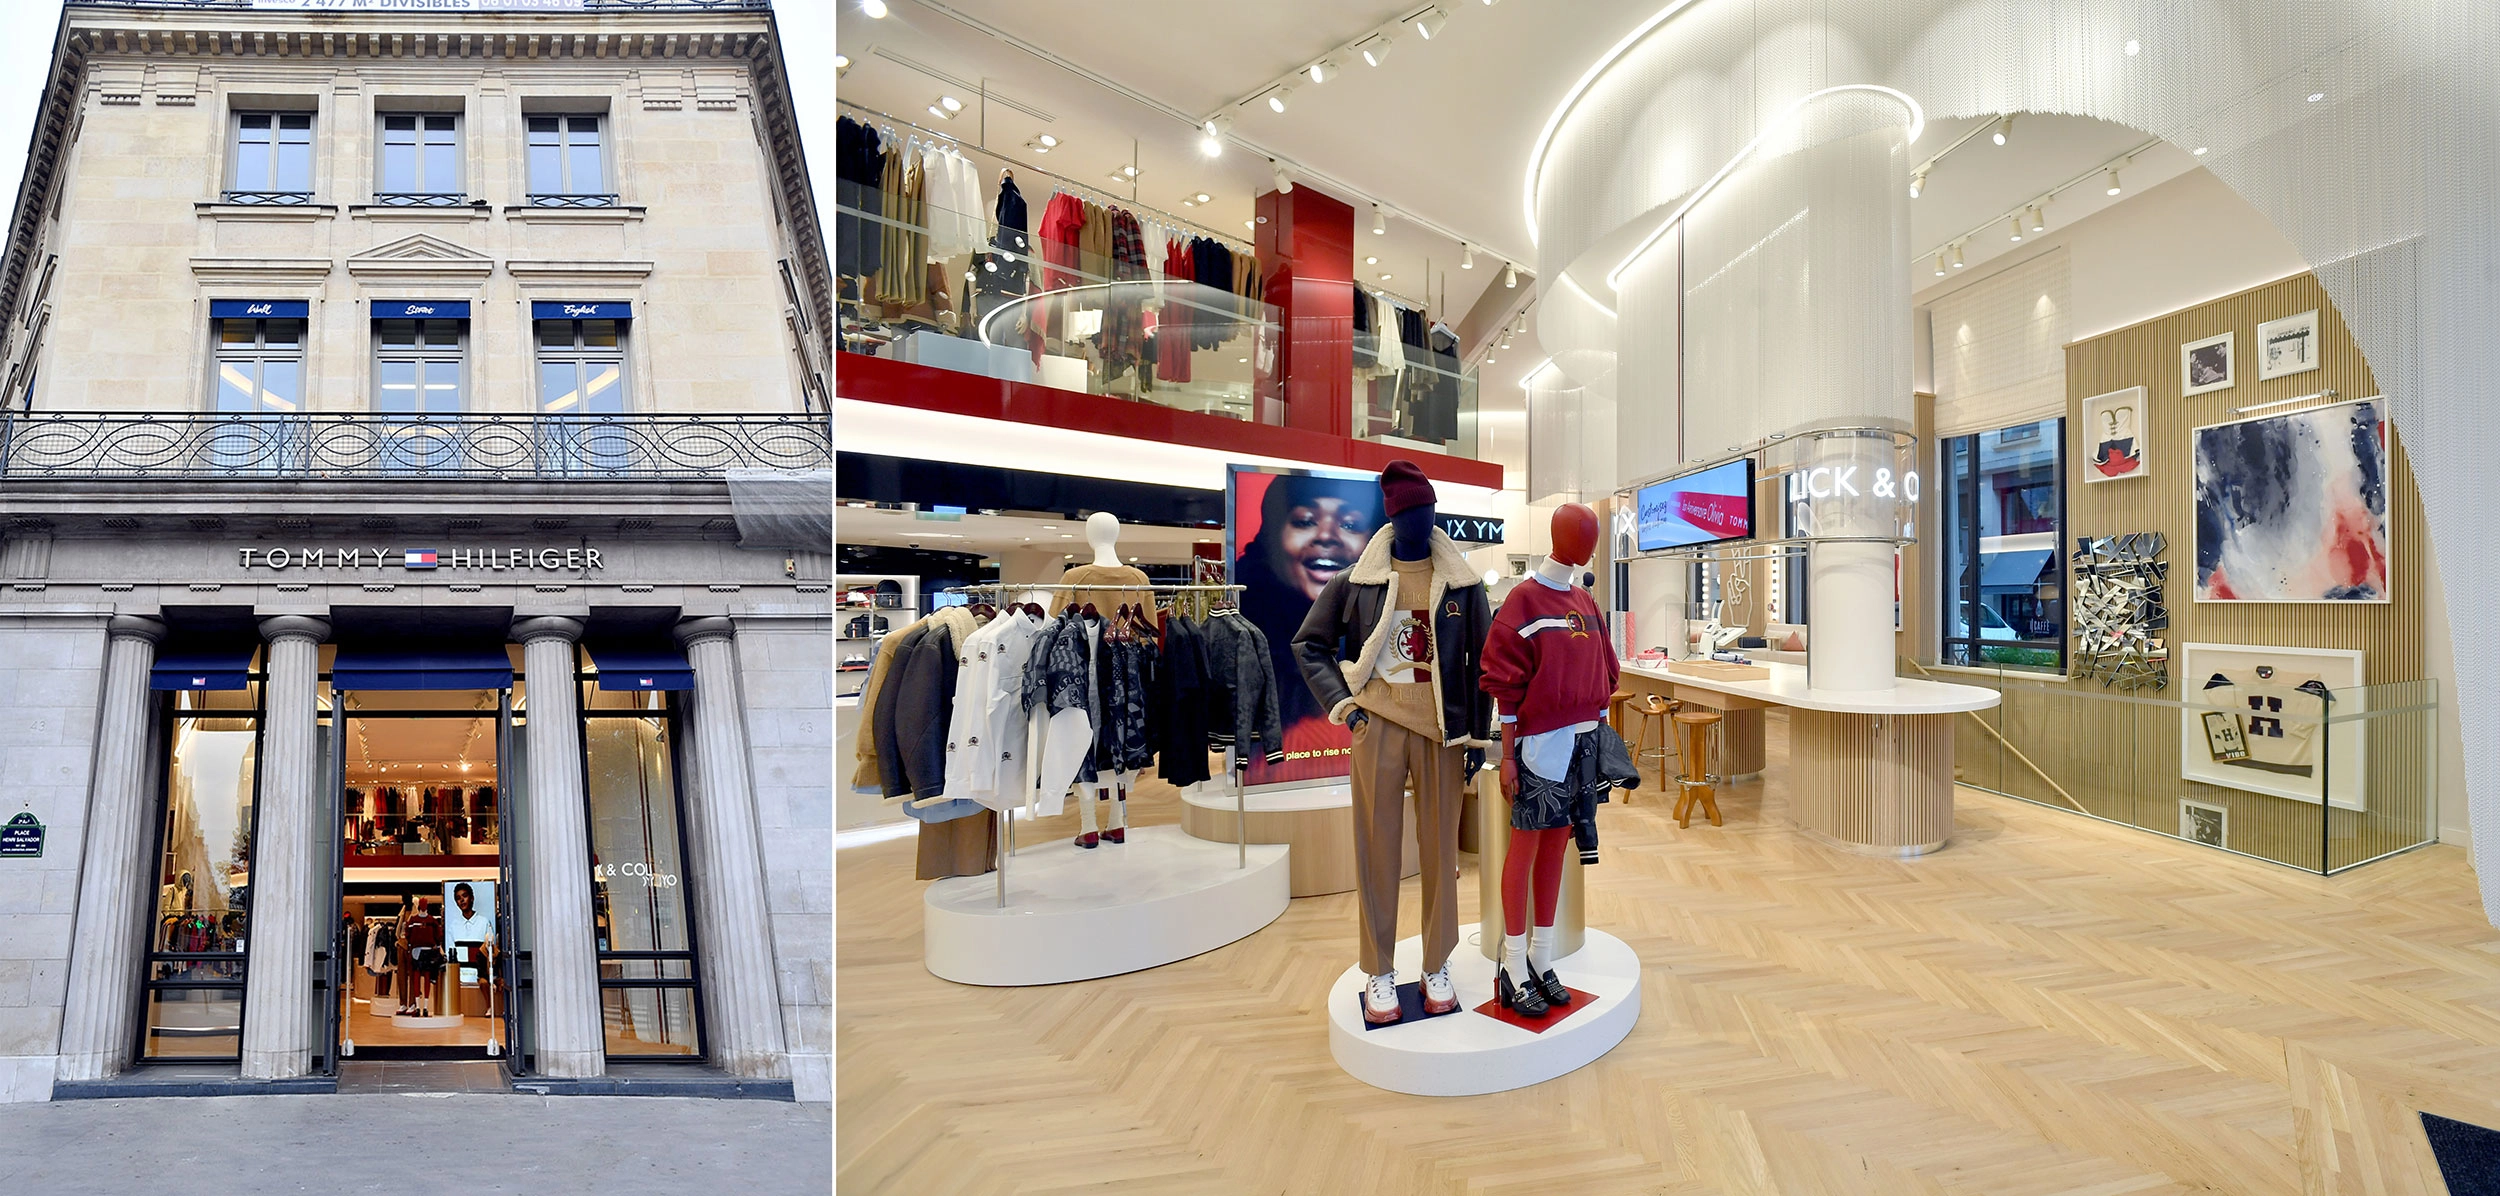 Tommy Hilfiger men's sportswear collection coming to Kohl's stores